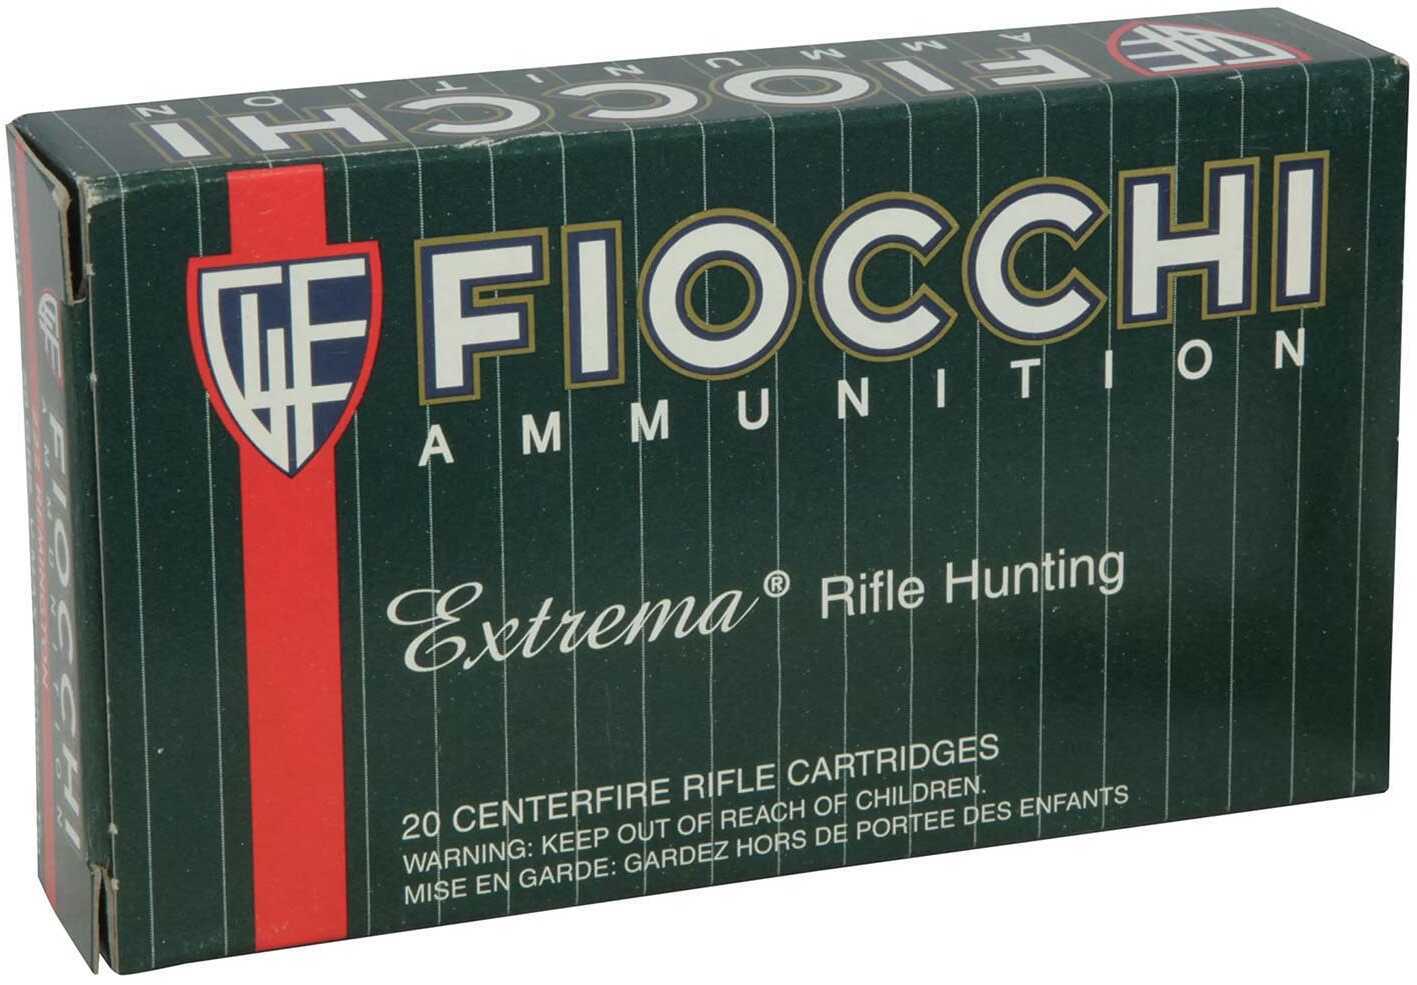 6.5 Creedmoor 129 Grain Jacketed Soft Point 20 Rounds Fiocchi Ammunition